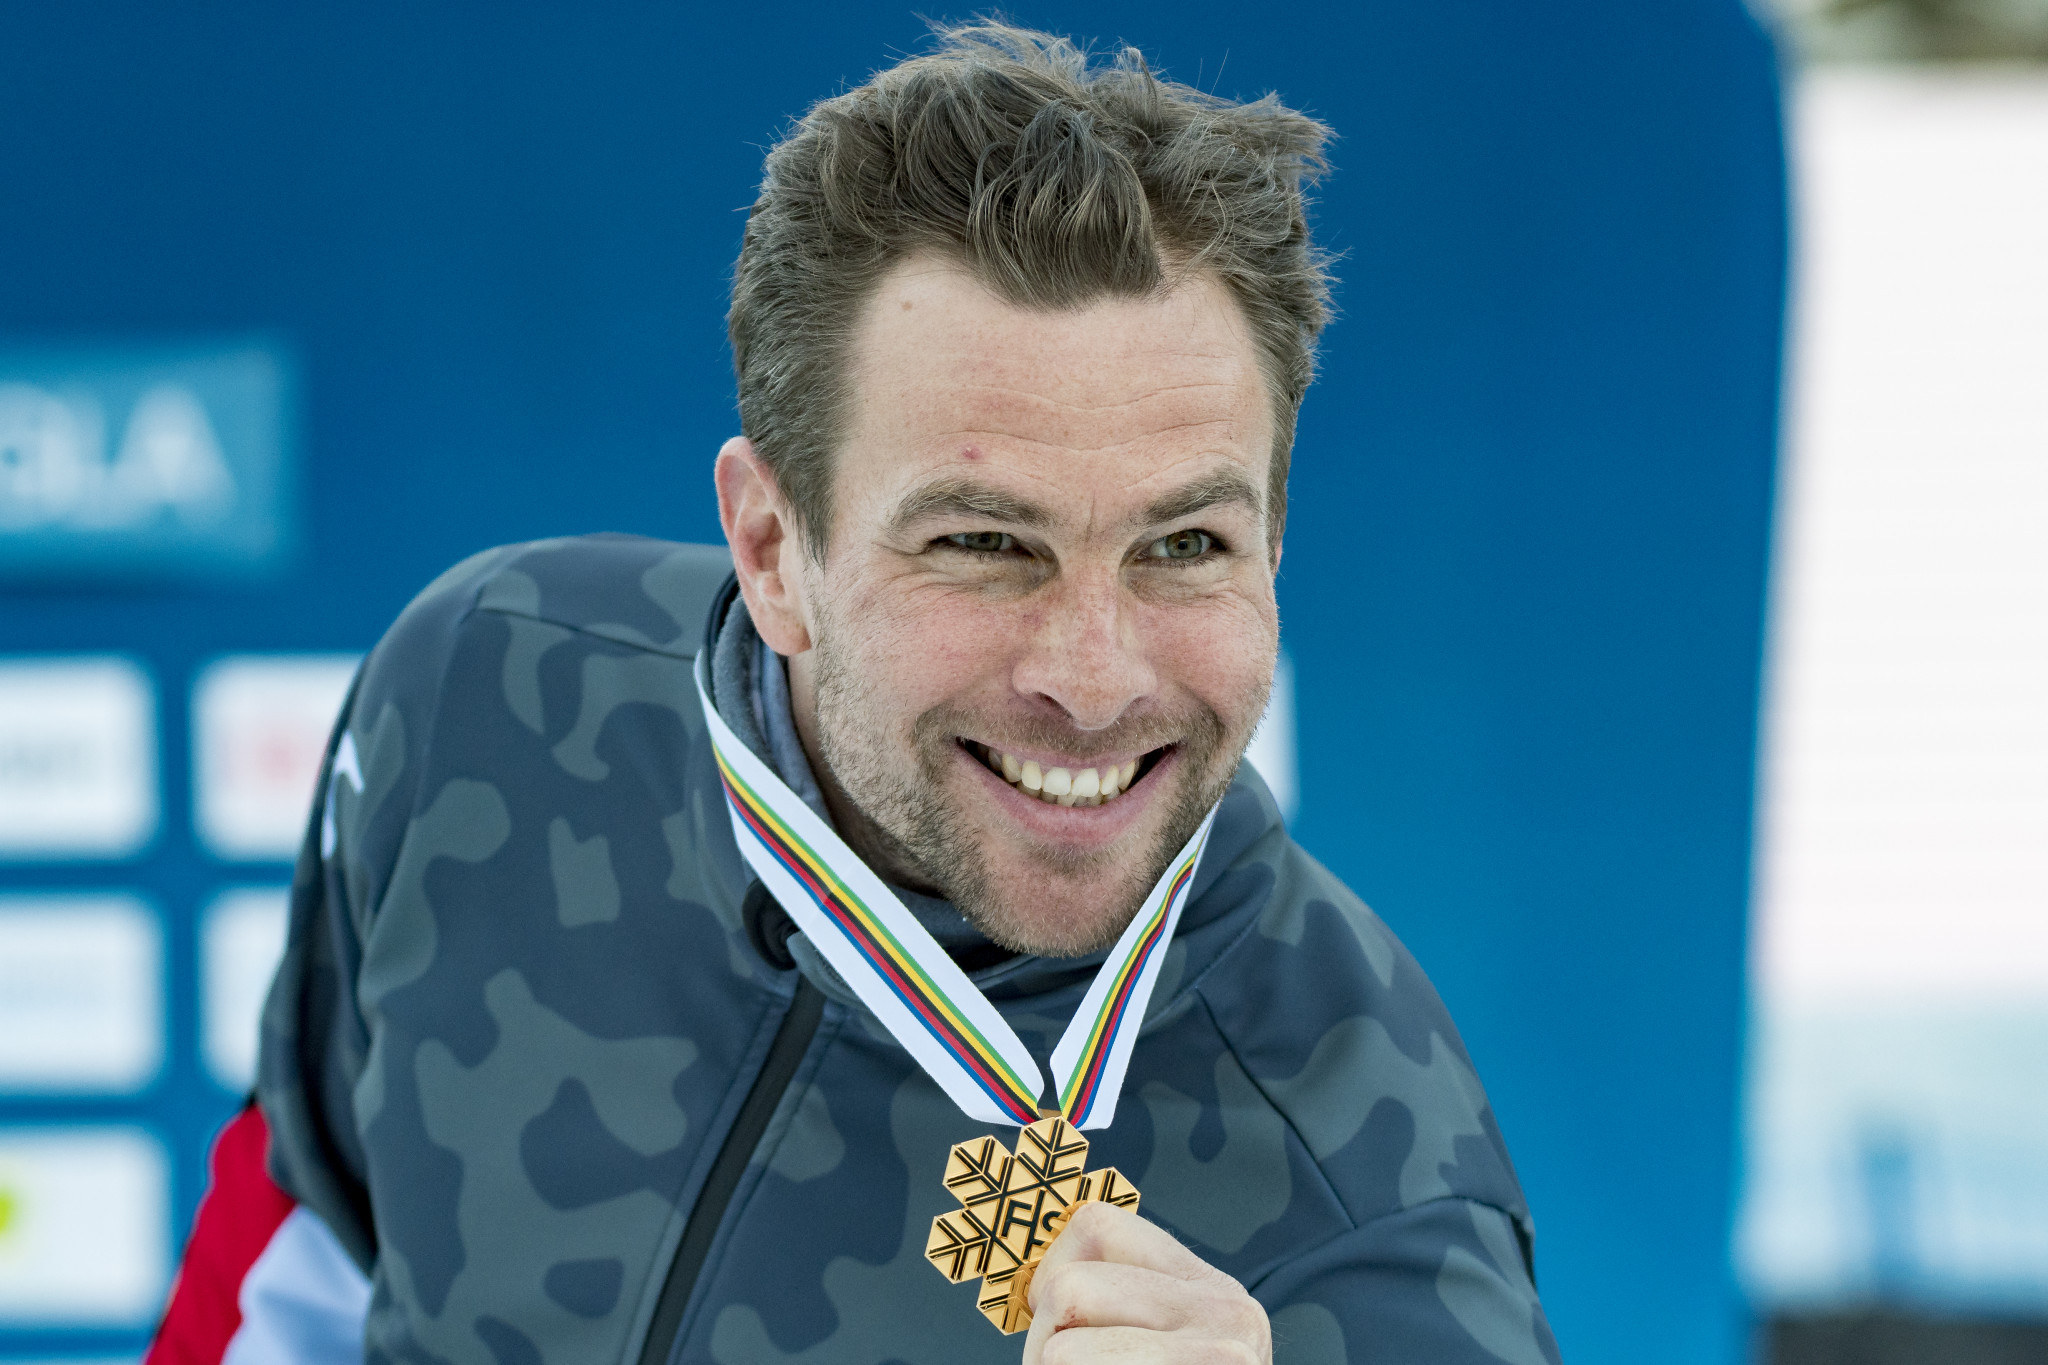 Karl earns fifth title at FIS Snowboard World Championships after parallel slalom victory